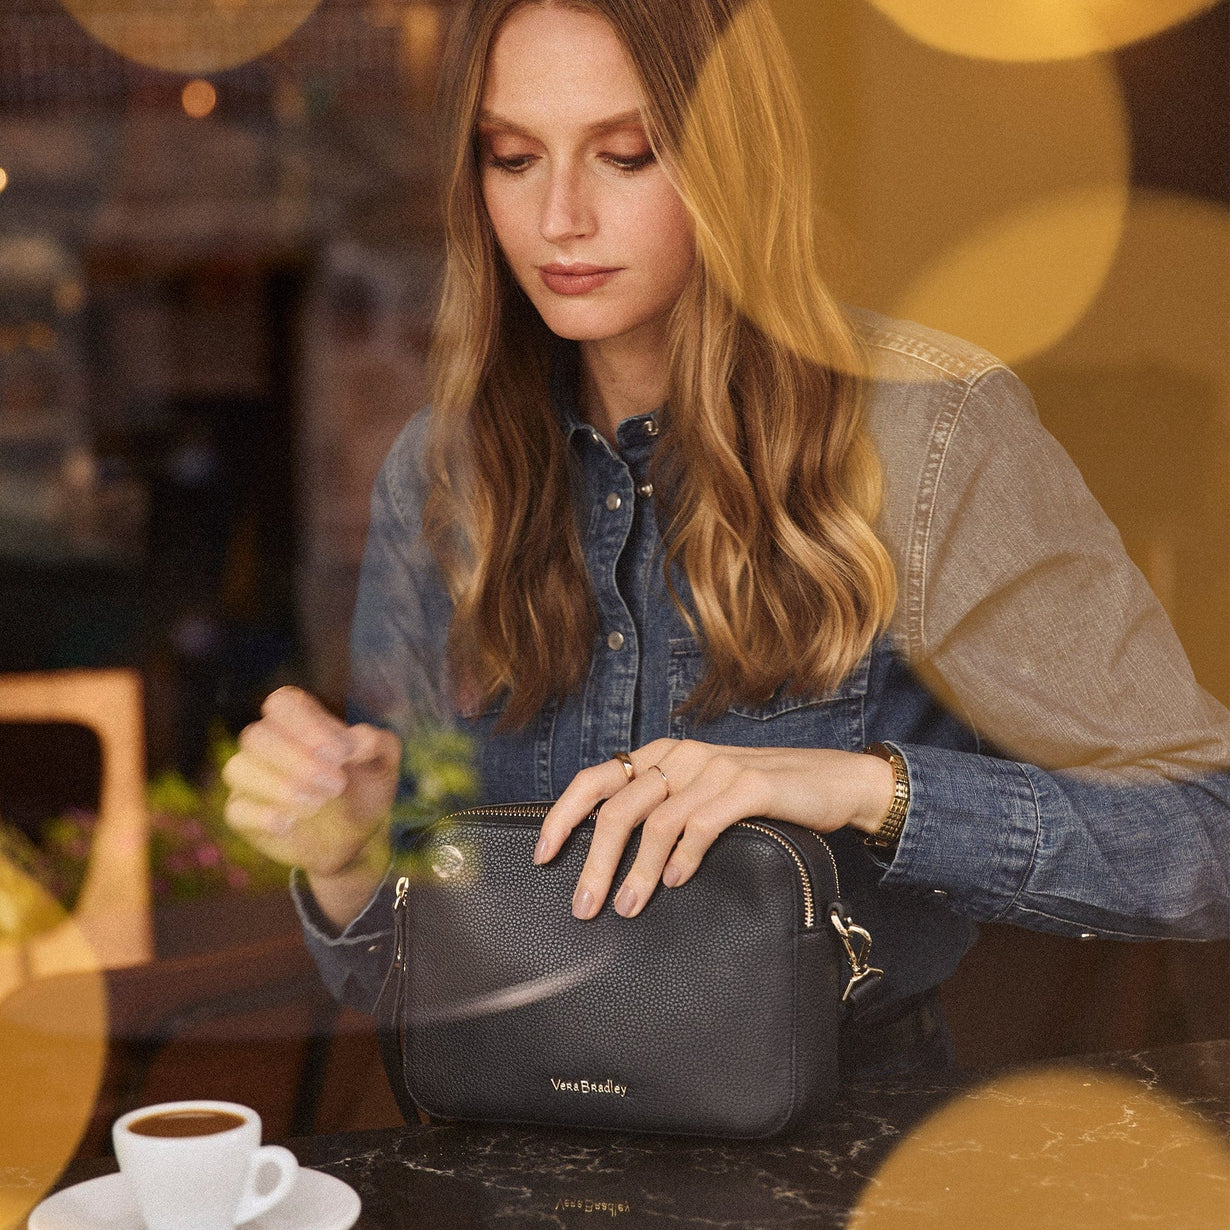 Woman at counter in cafe with black leather handbag